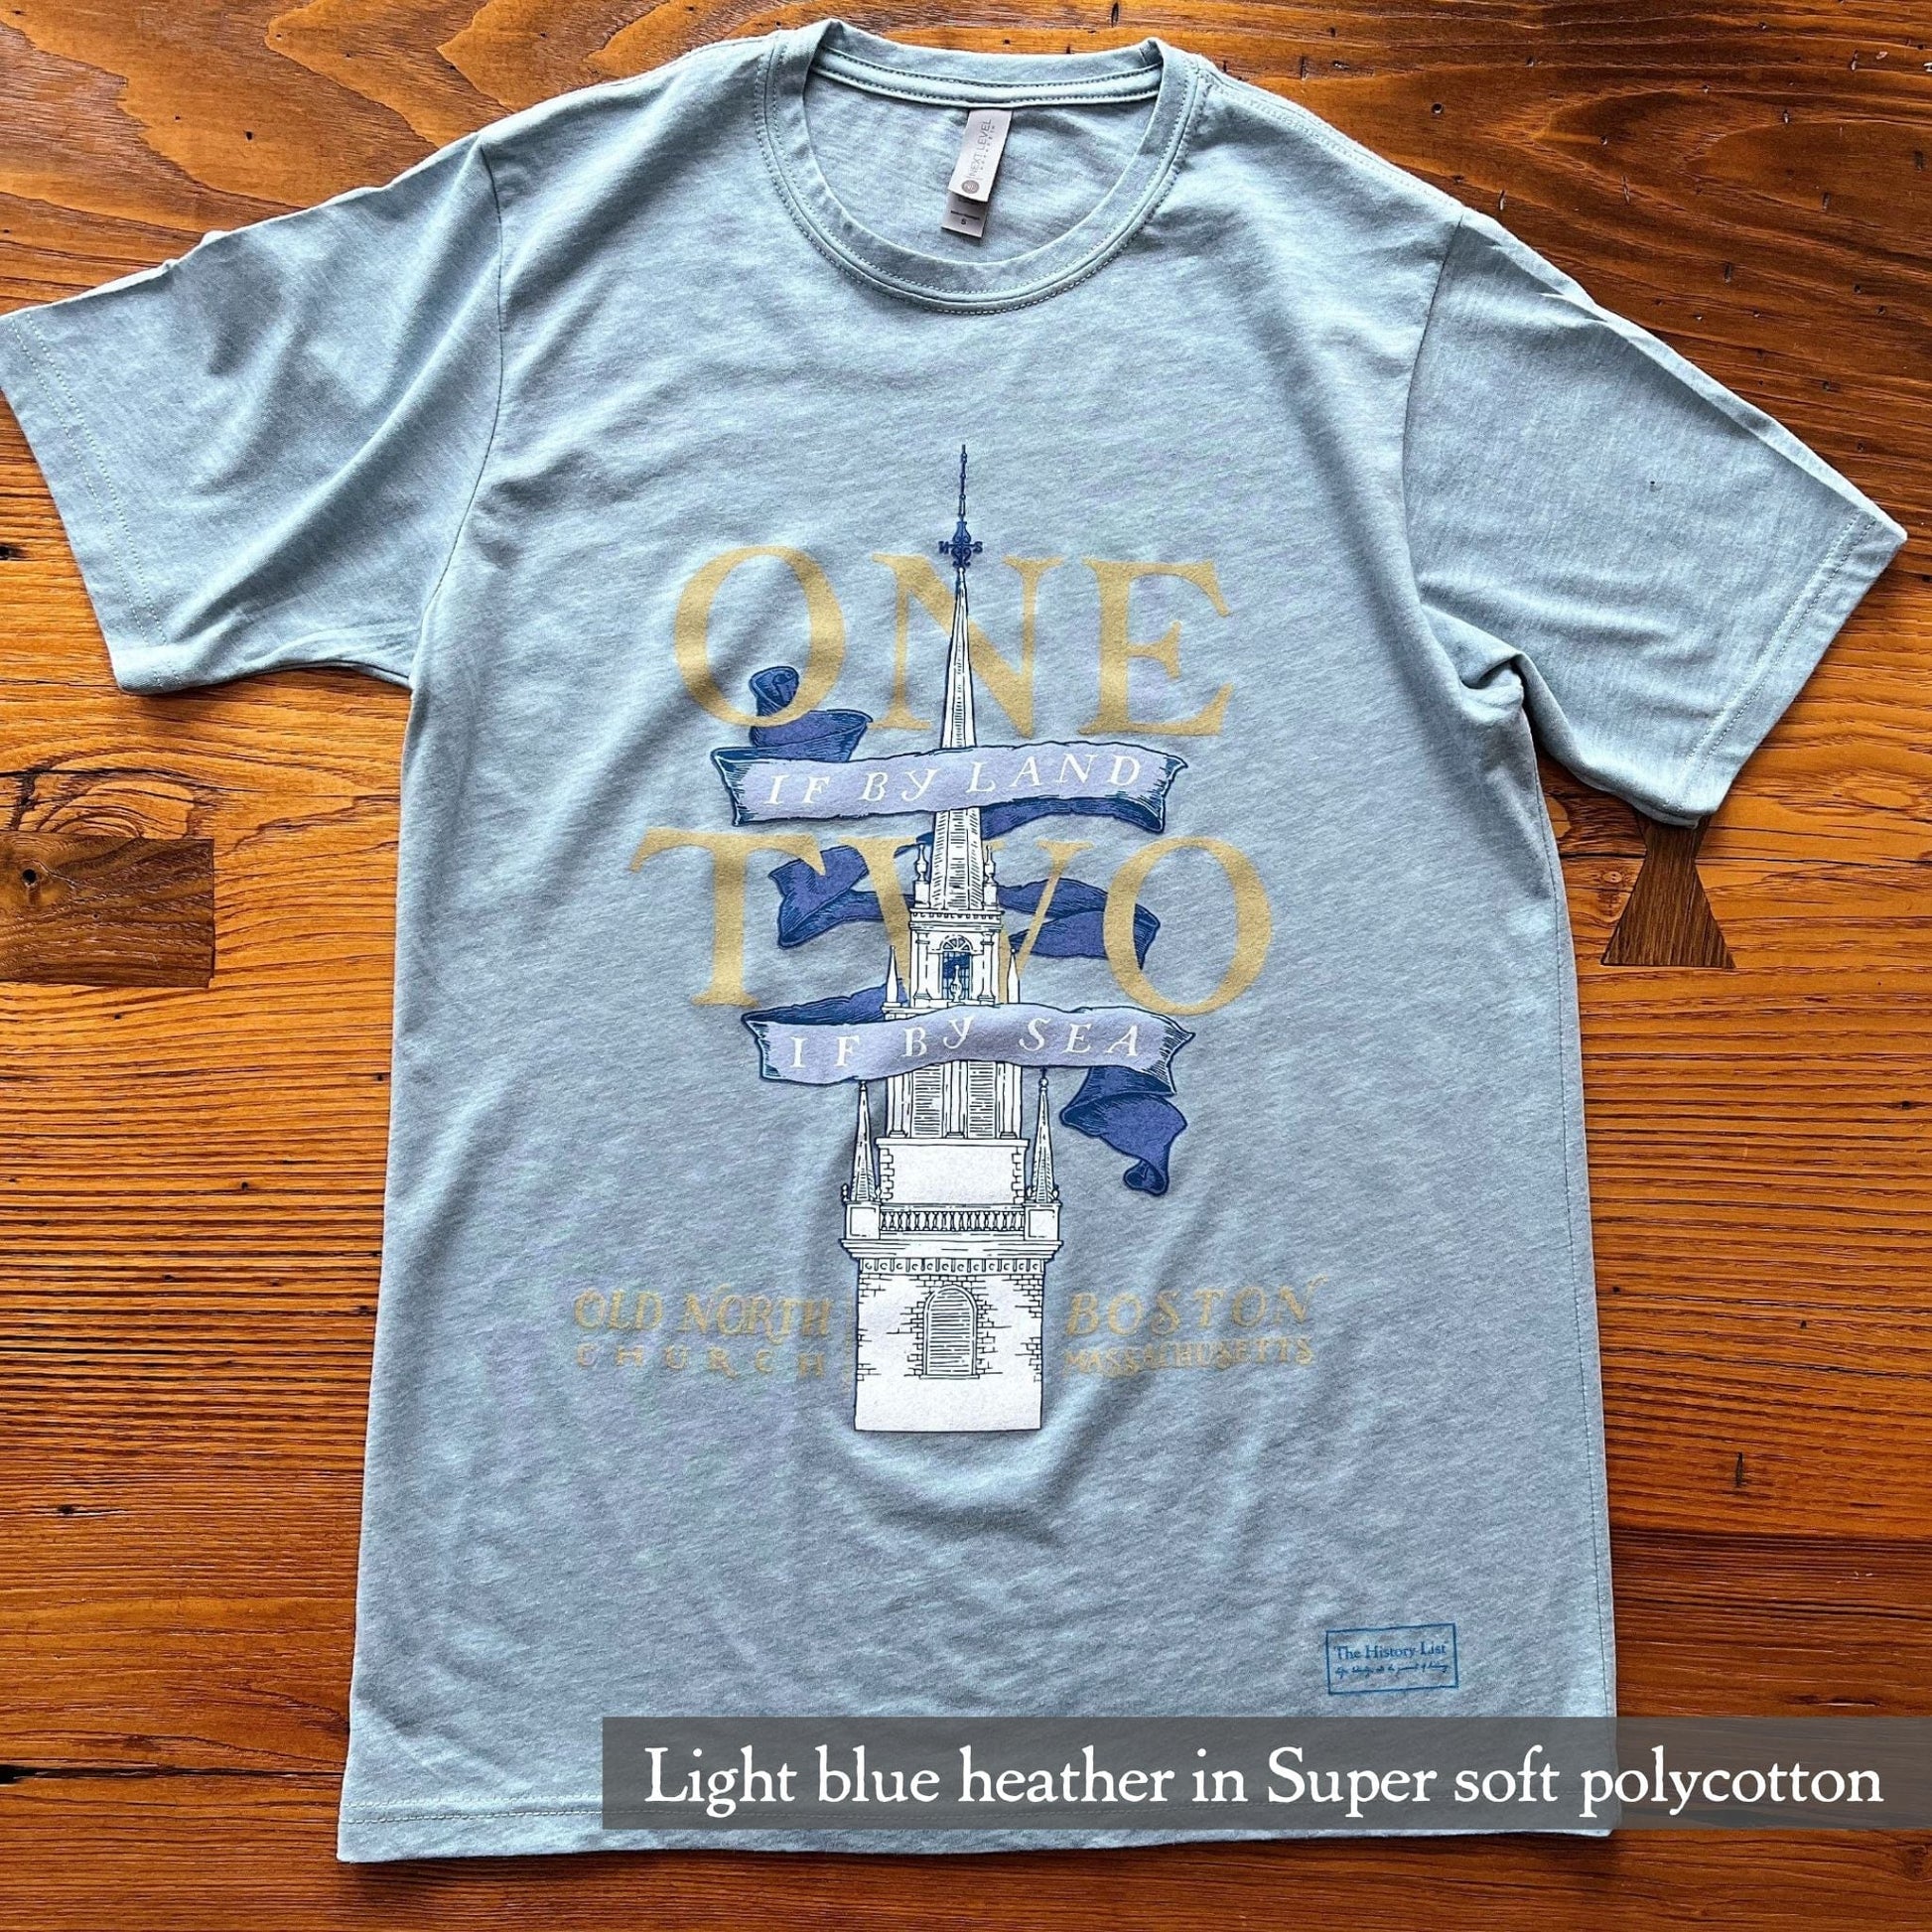 Light Blue Heather "One if by land . . ." Old North Special Edition Shirt from the history list store